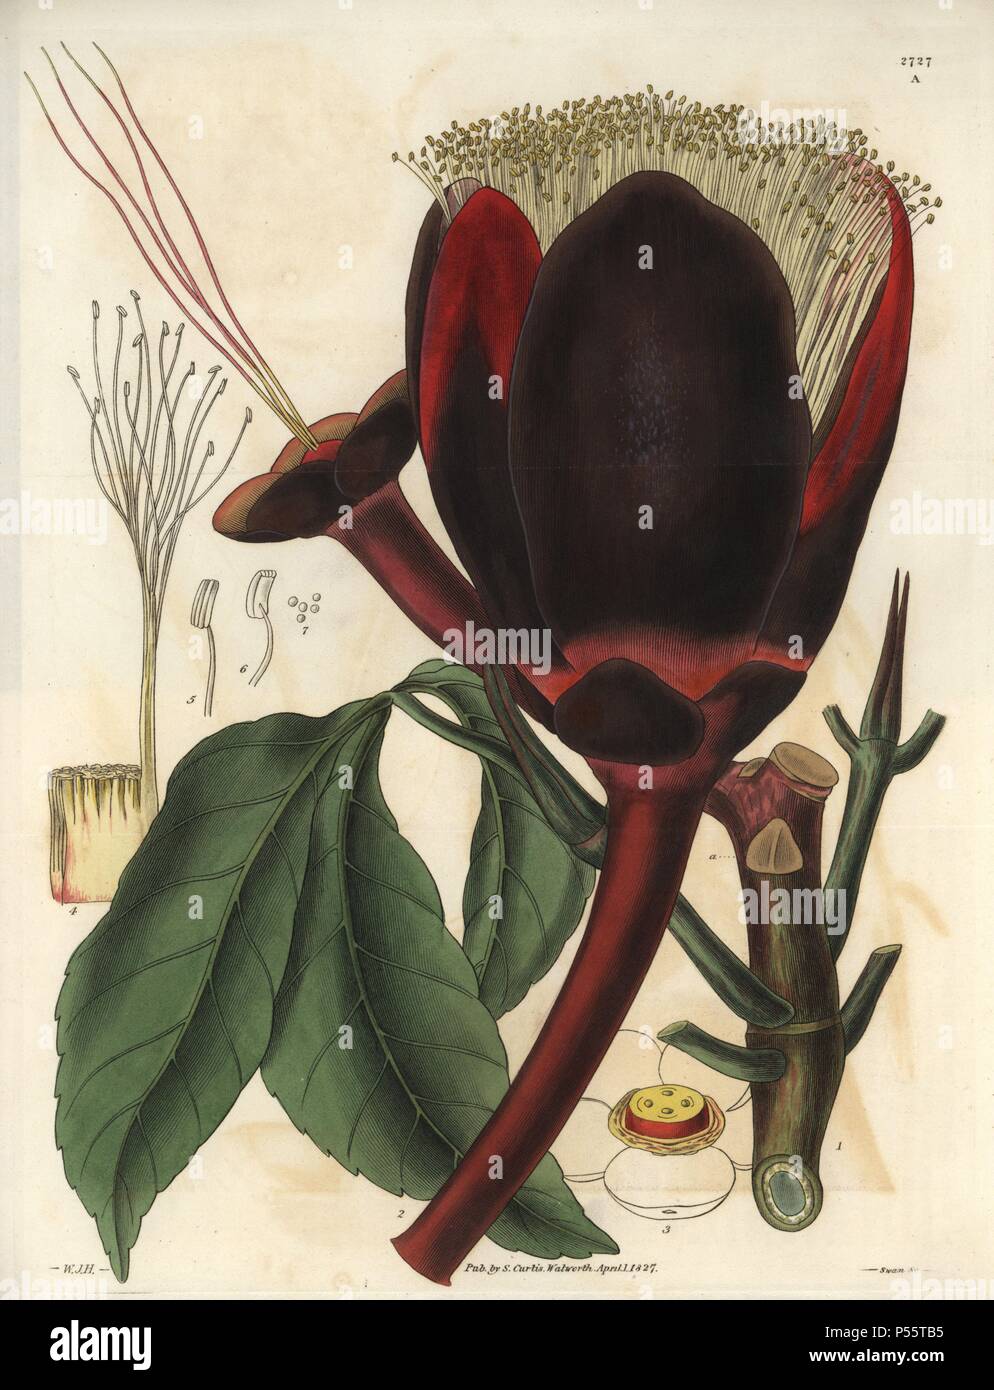 Caryocar nuciferum. . Souari or butter-nut plant with large deep chocolate-brown flower. Native to South America.. . Illustration by WJ Hooker, engraved by Swan. Handcolored copperplate engraving from William Curtis's 'The Botanical Magazine' 1827.. . William Jackson Hooker (1785-1865) was an English botanist, writer and artist. He was Regius Professor of Botany at Glasgow University, and editor of Curtis' 'Botanical Magazine' from 1827 to 1865. In 1841, he was appointed director of the Royal Botanic Gardens at Kew, and was succeeded by his son Joseph Dalton. Hooker documented the fern and orc Stock Photo